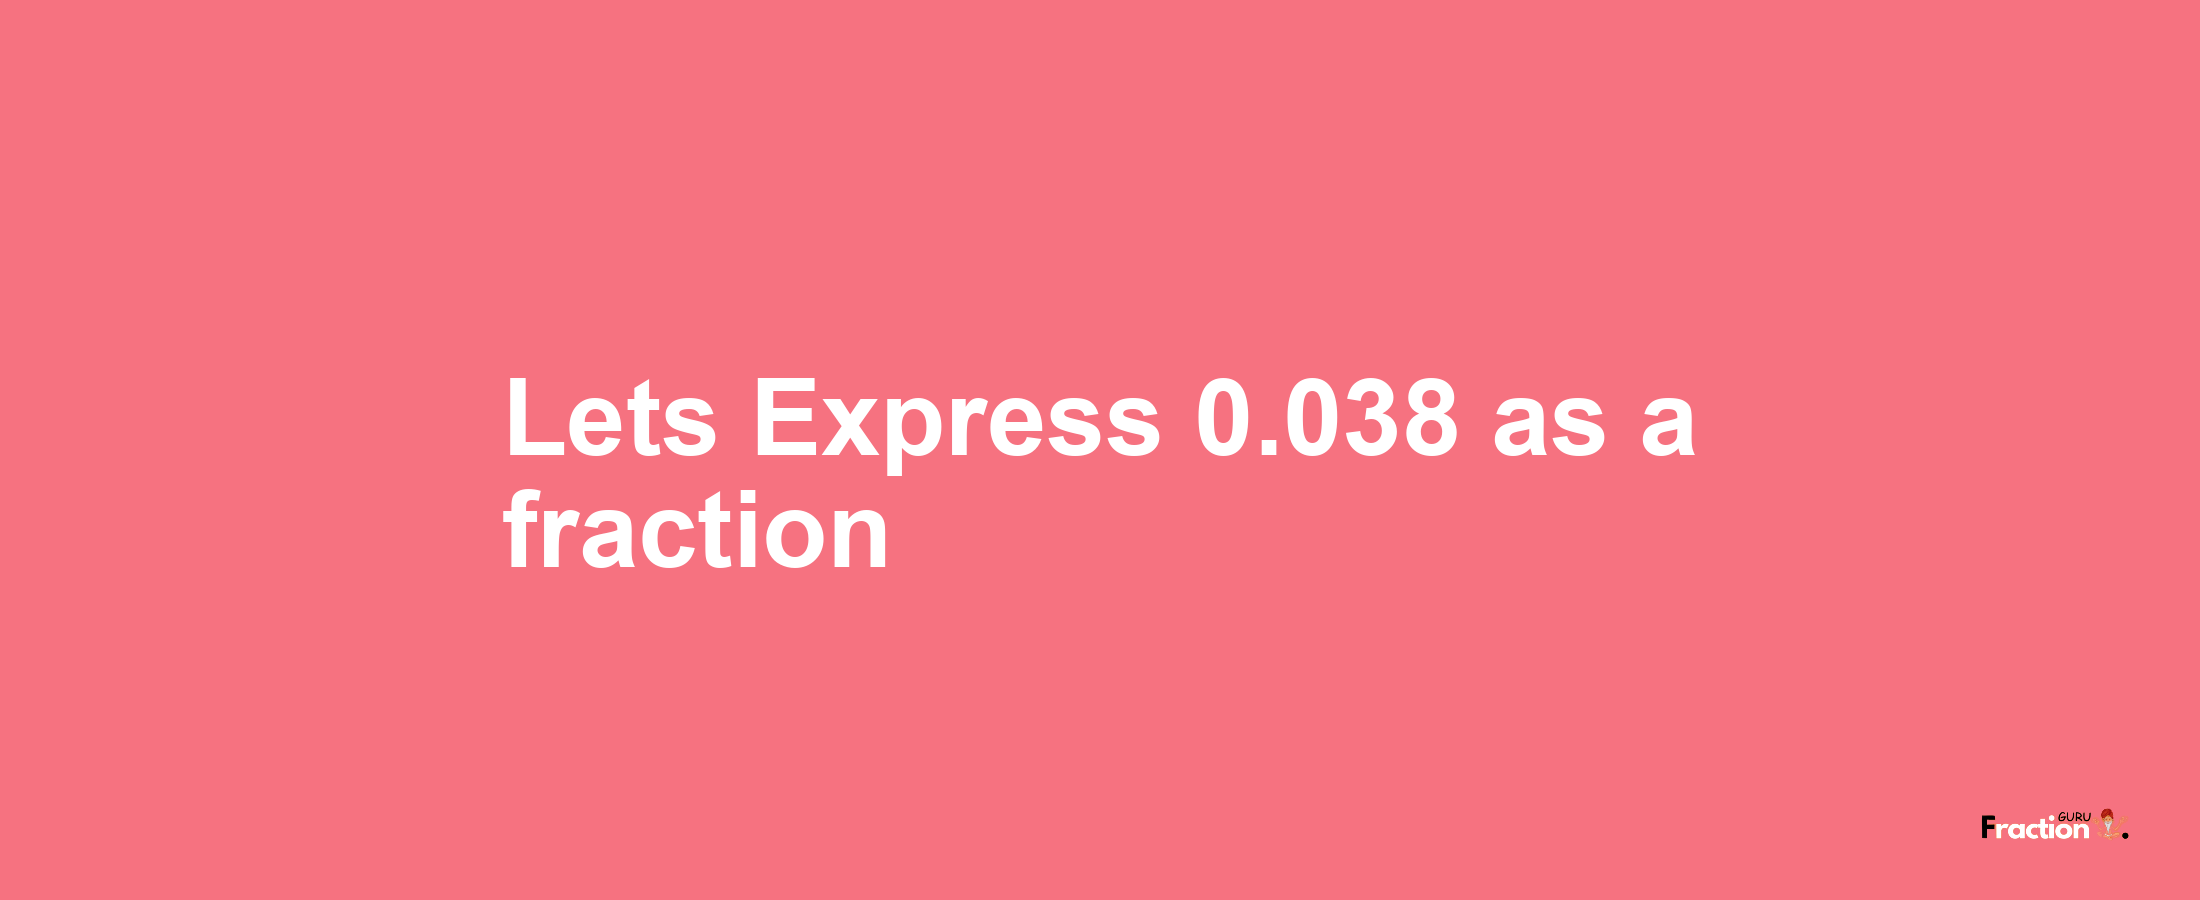 Lets Express 0.038 as afraction